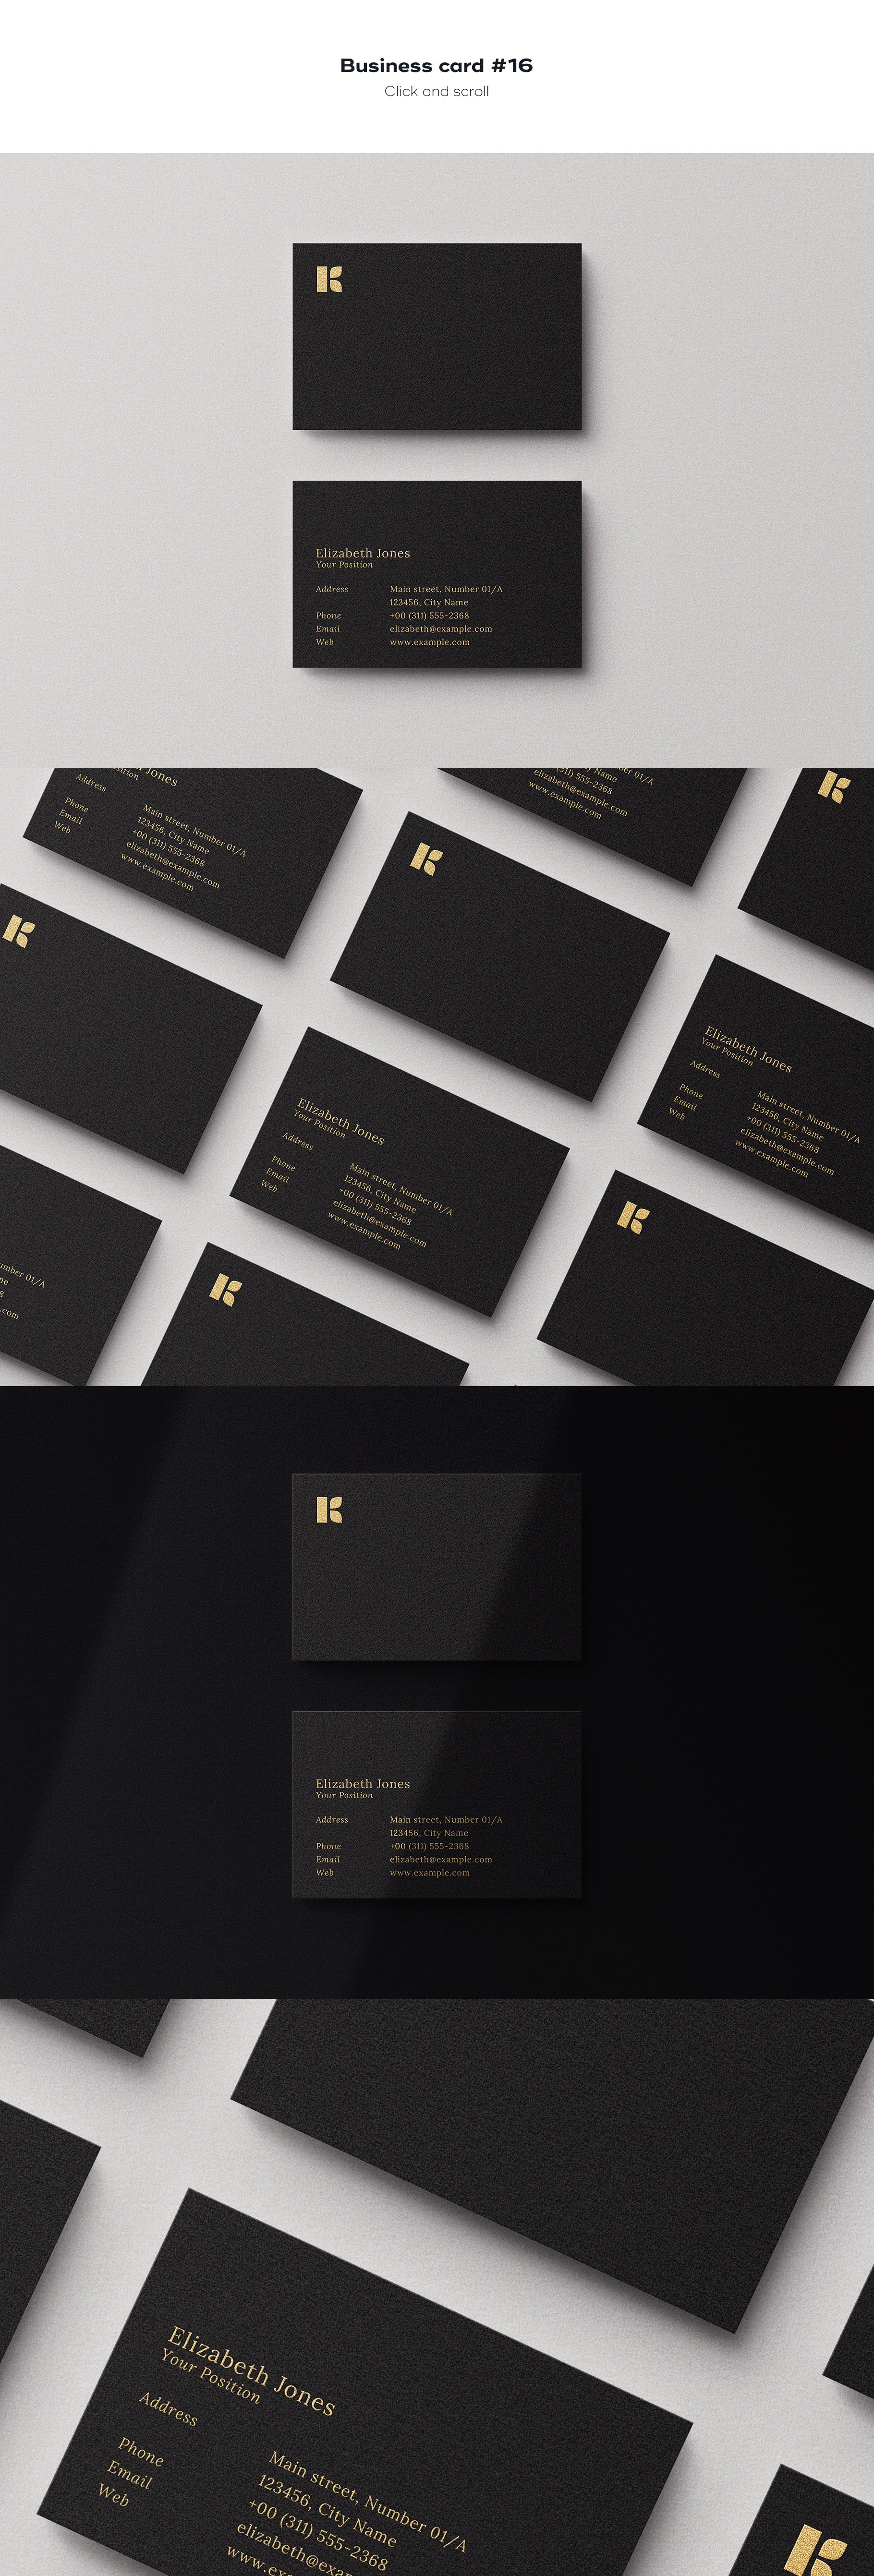 business card 16 807